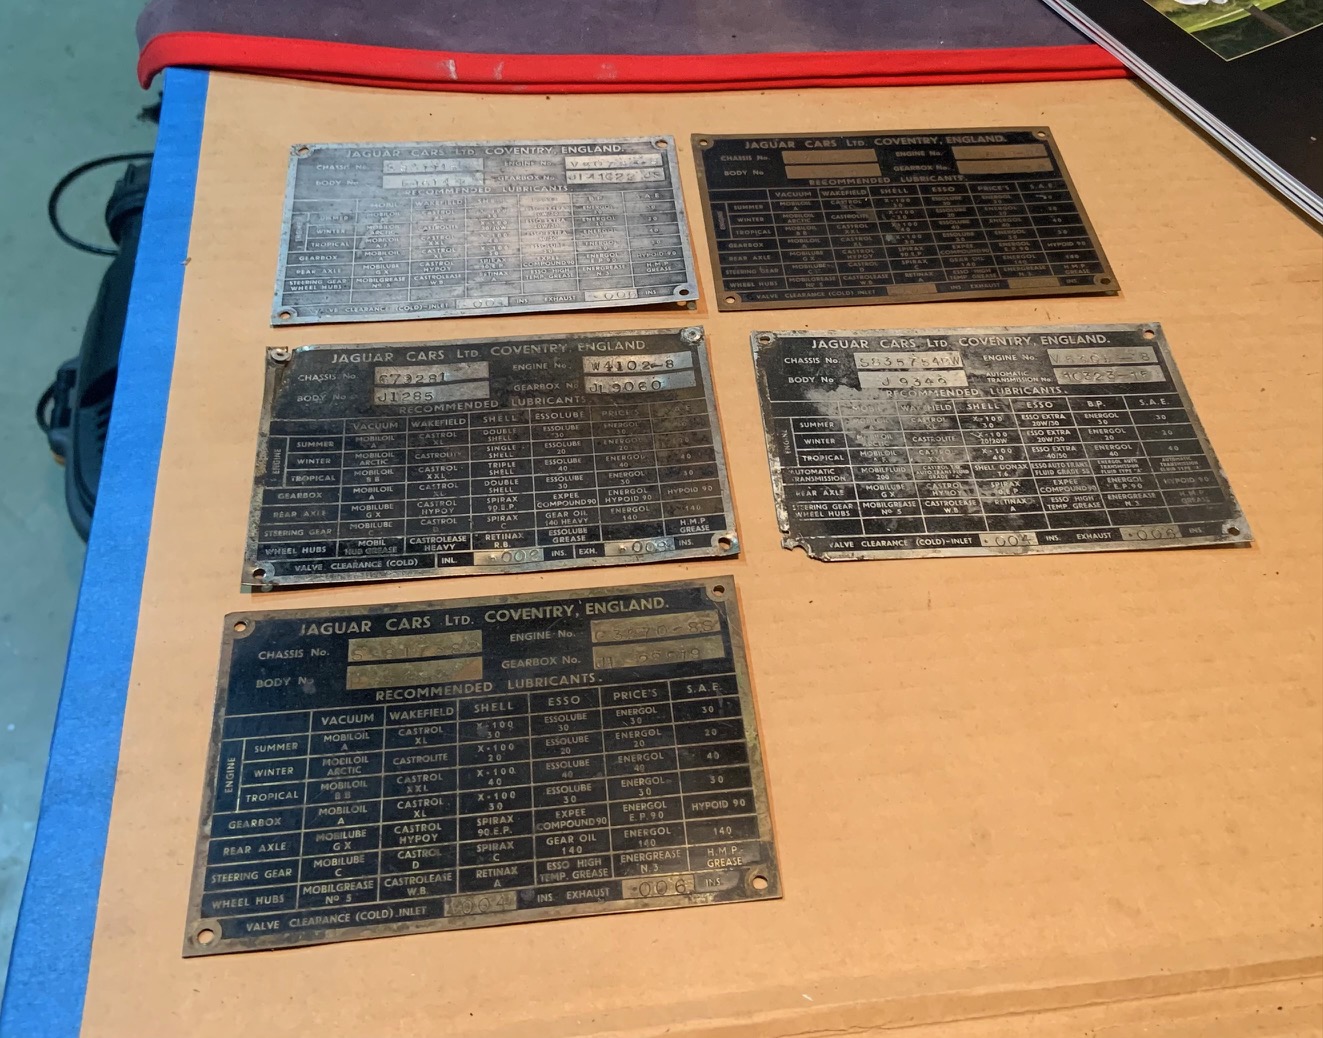 Free Chassis Plates to Original Owners